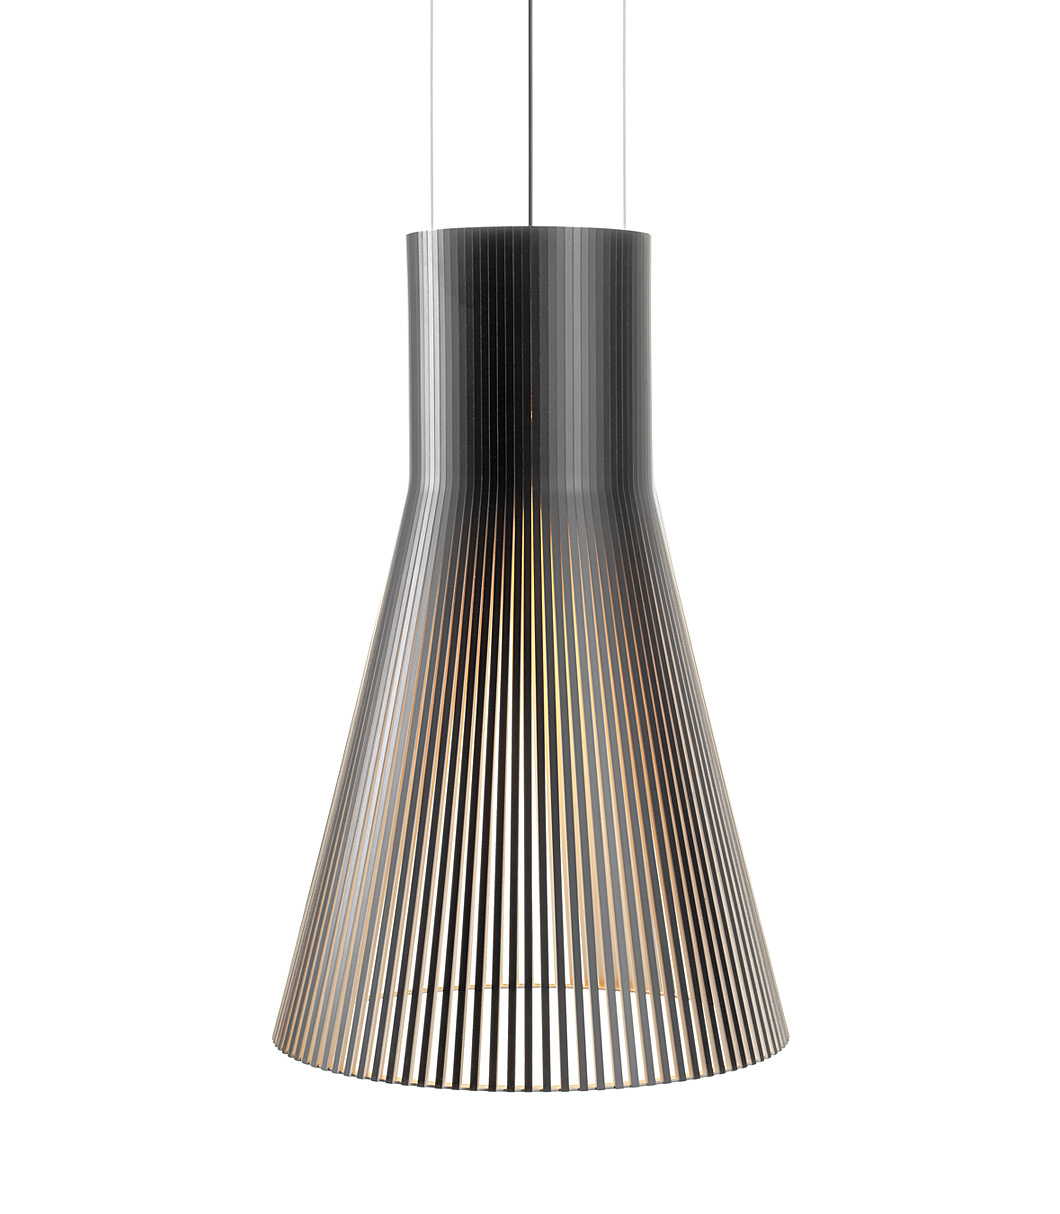 Magnum 4202 pendant lamp is available in black laminated